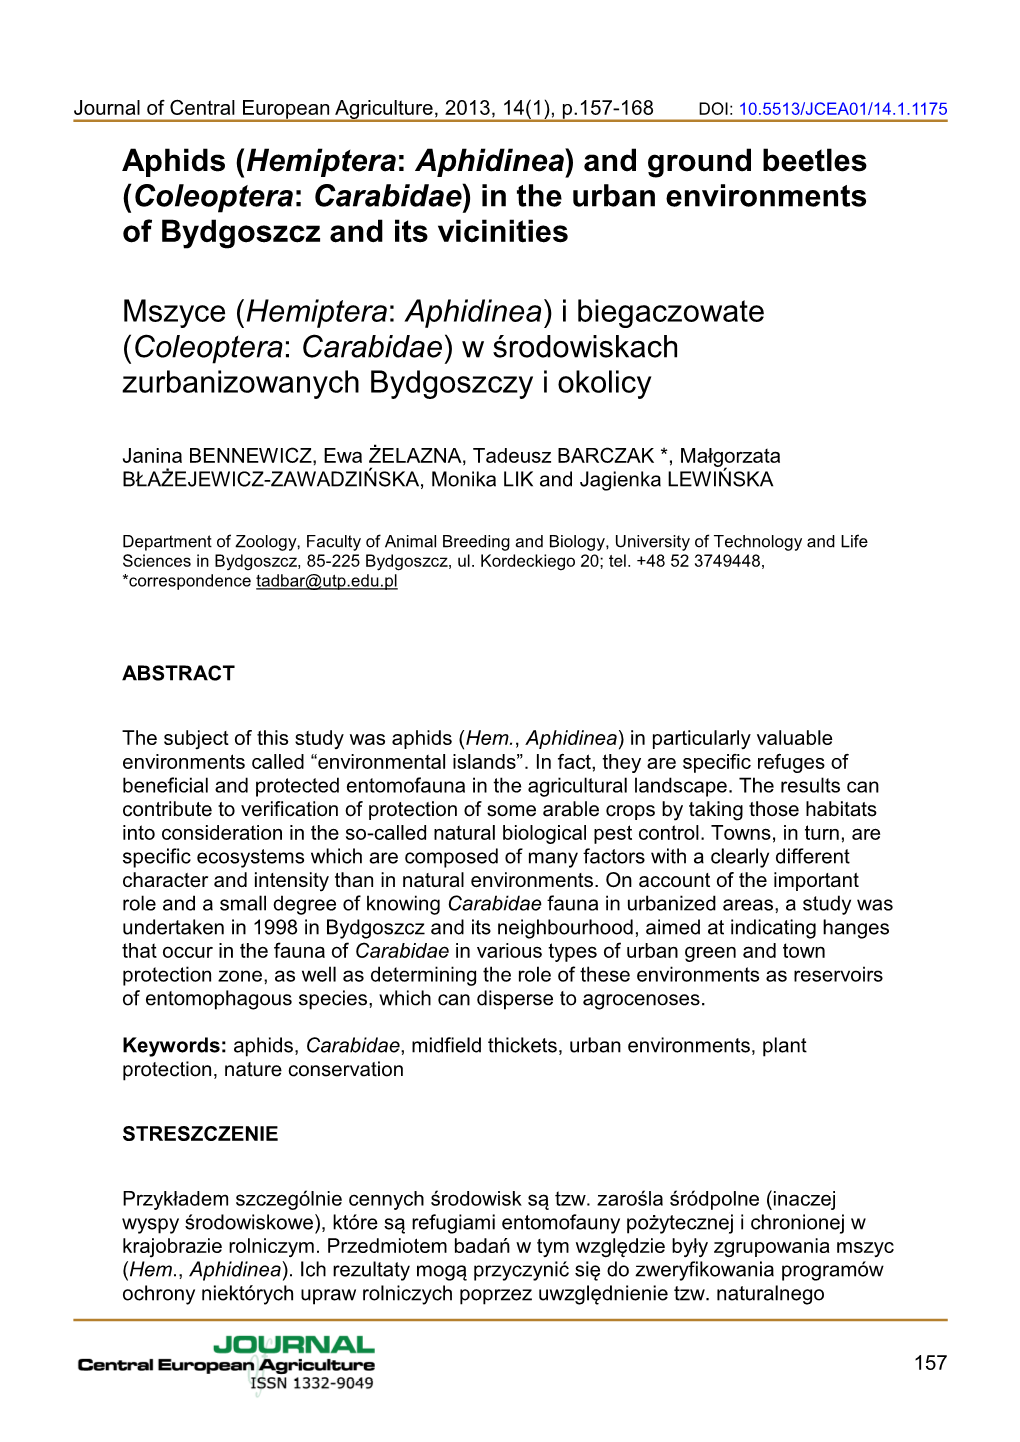 Aphids (Hemiptera: Aphidinea) and Ground Beetles (Coleoptera: Carabidae) in the Urban Environments of Bydgoszcz and Its Vicinities